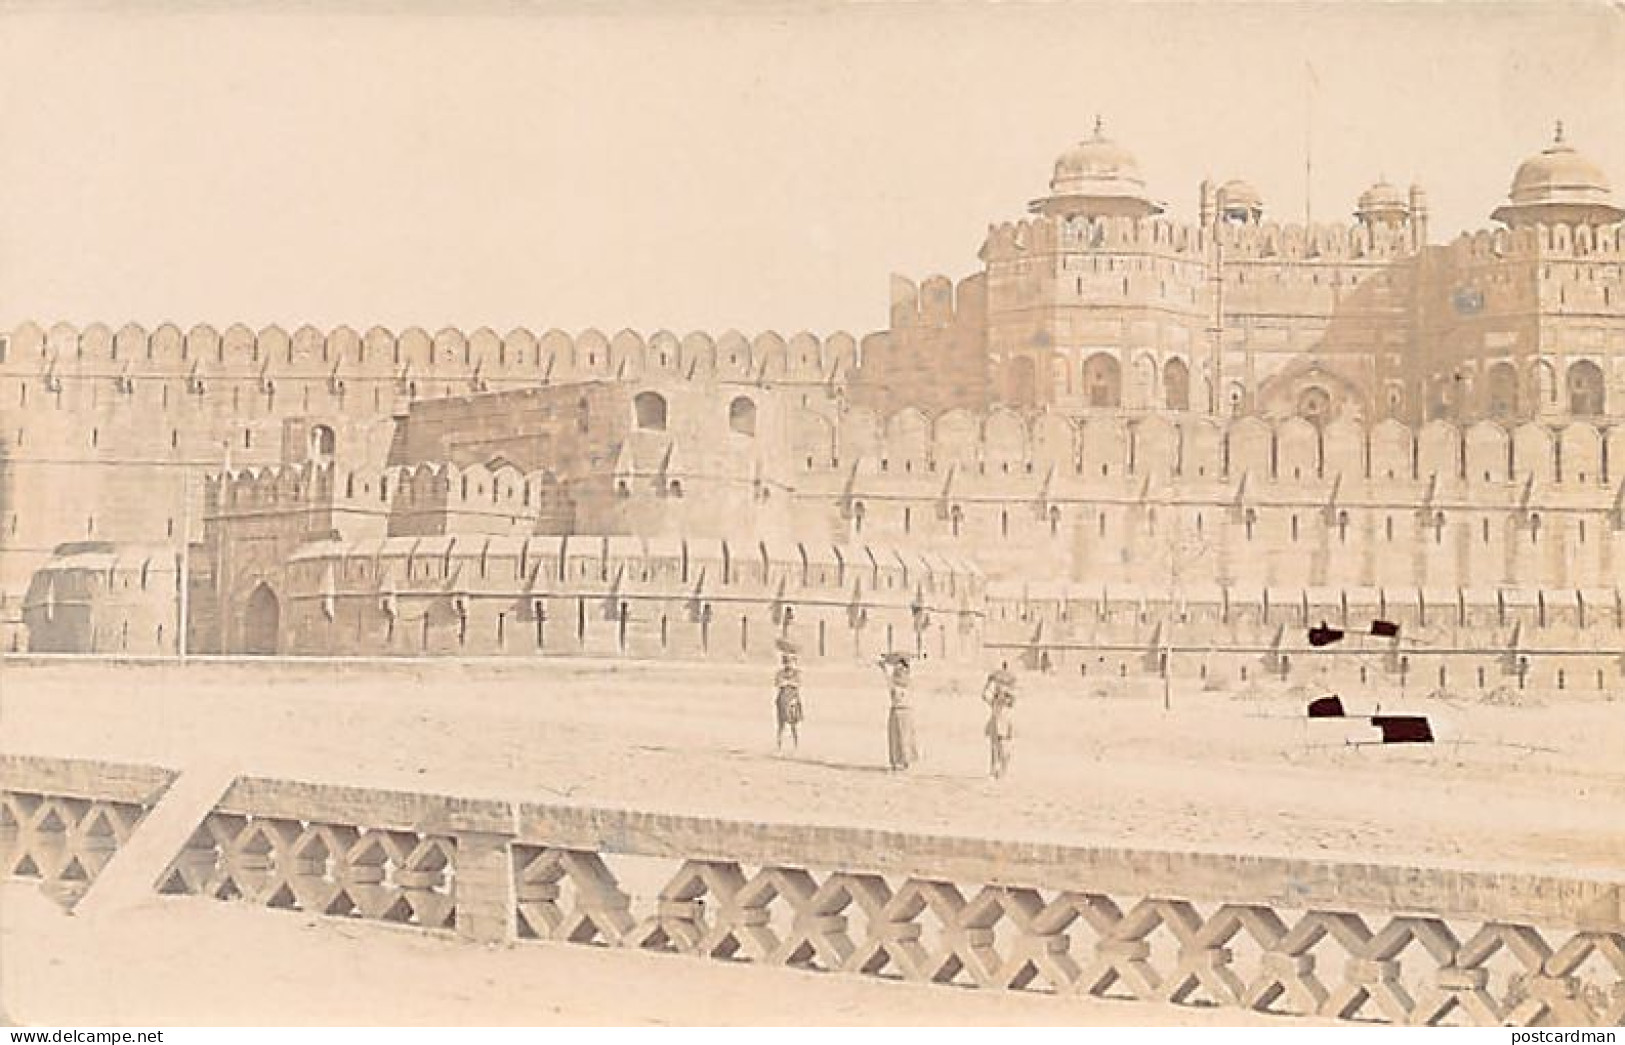 India - Fort Agra - REAL PHOTO - India